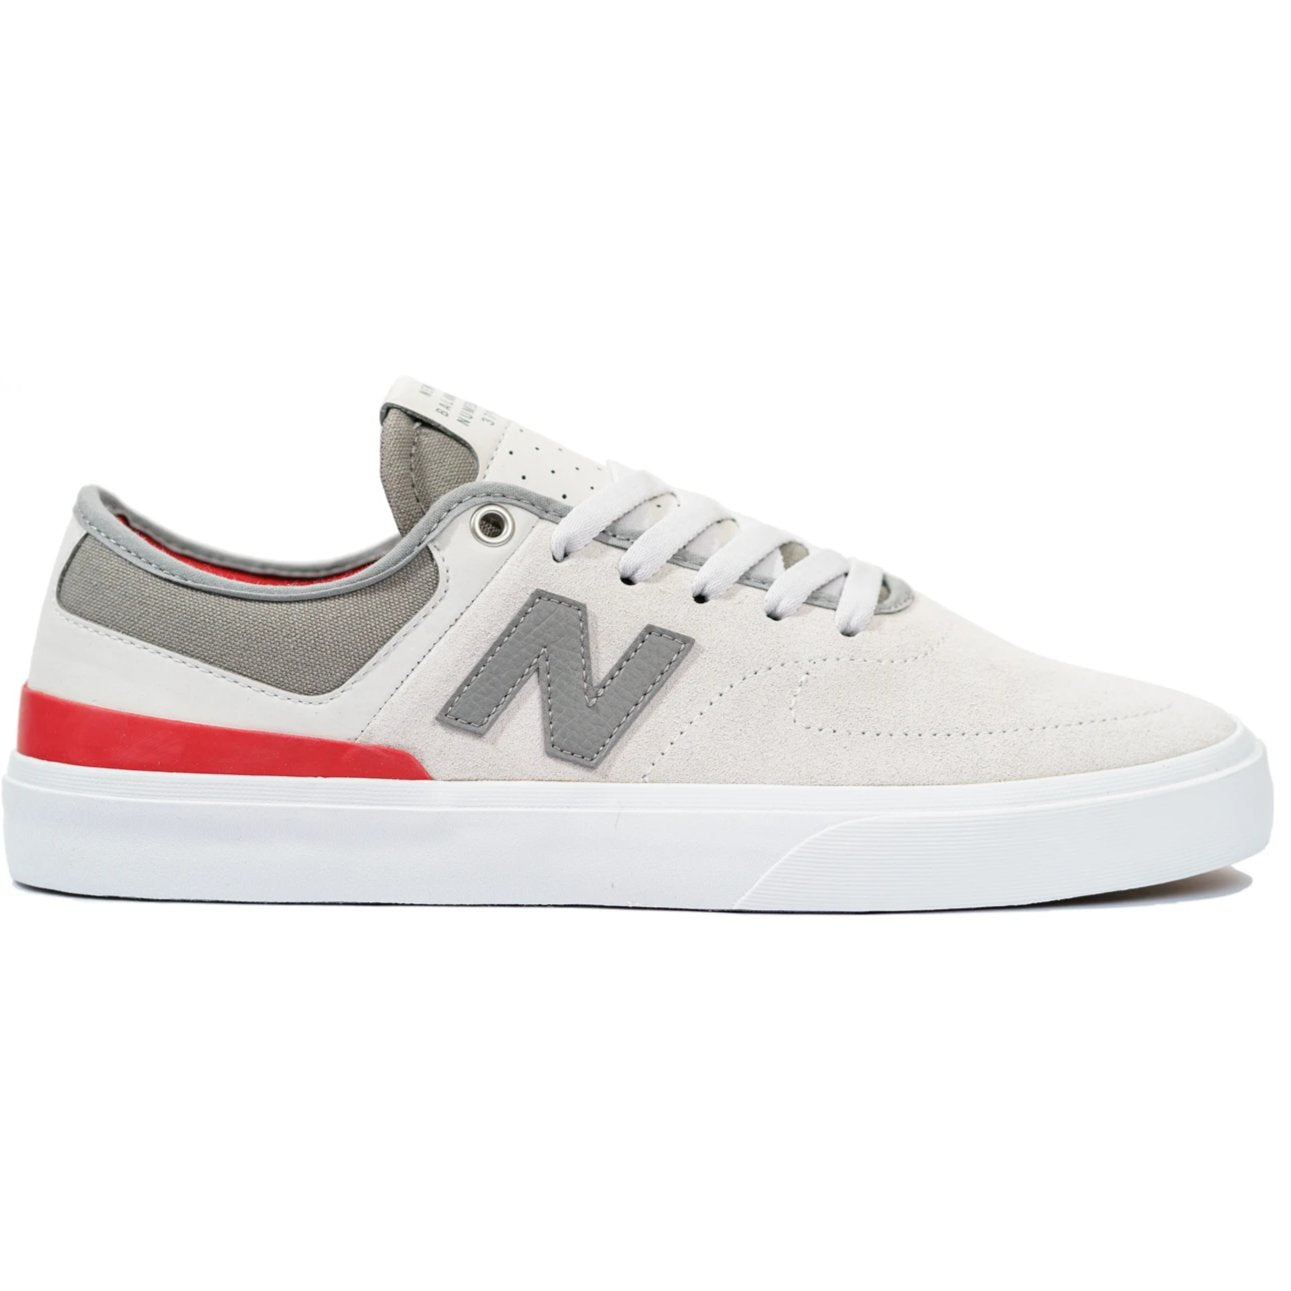 New Balance Numeric 379 - Grey with Red 